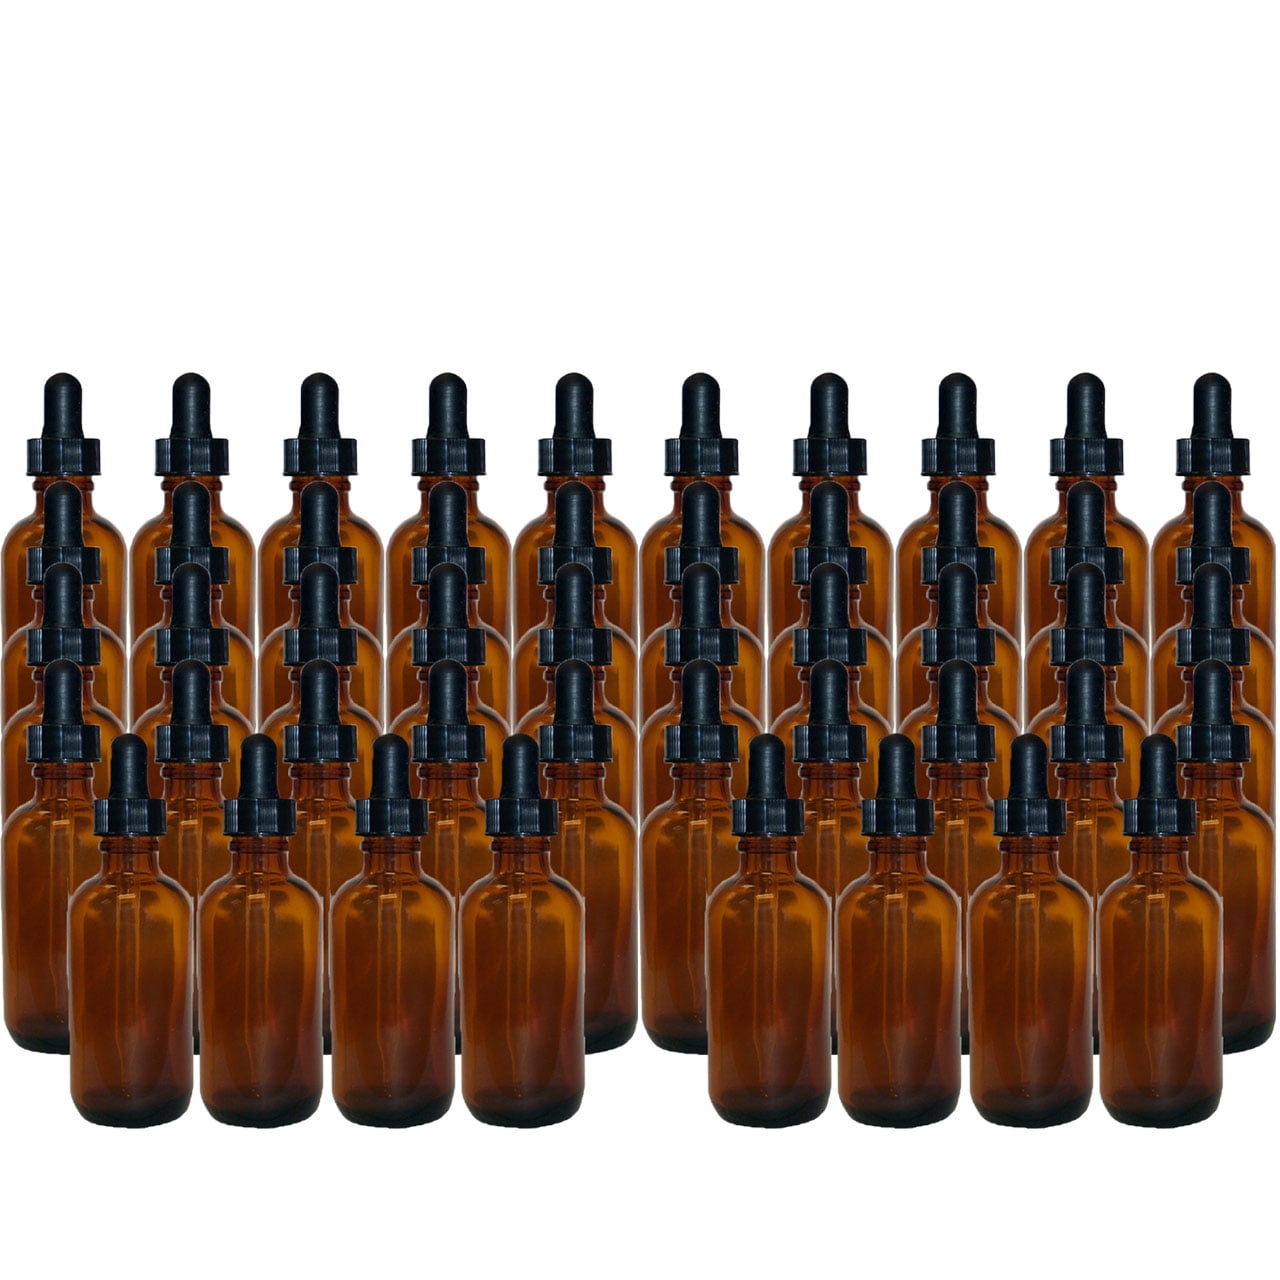 Amber 2oz Dropper Bottle (60ml) Pack of 48 - Glass Tincture